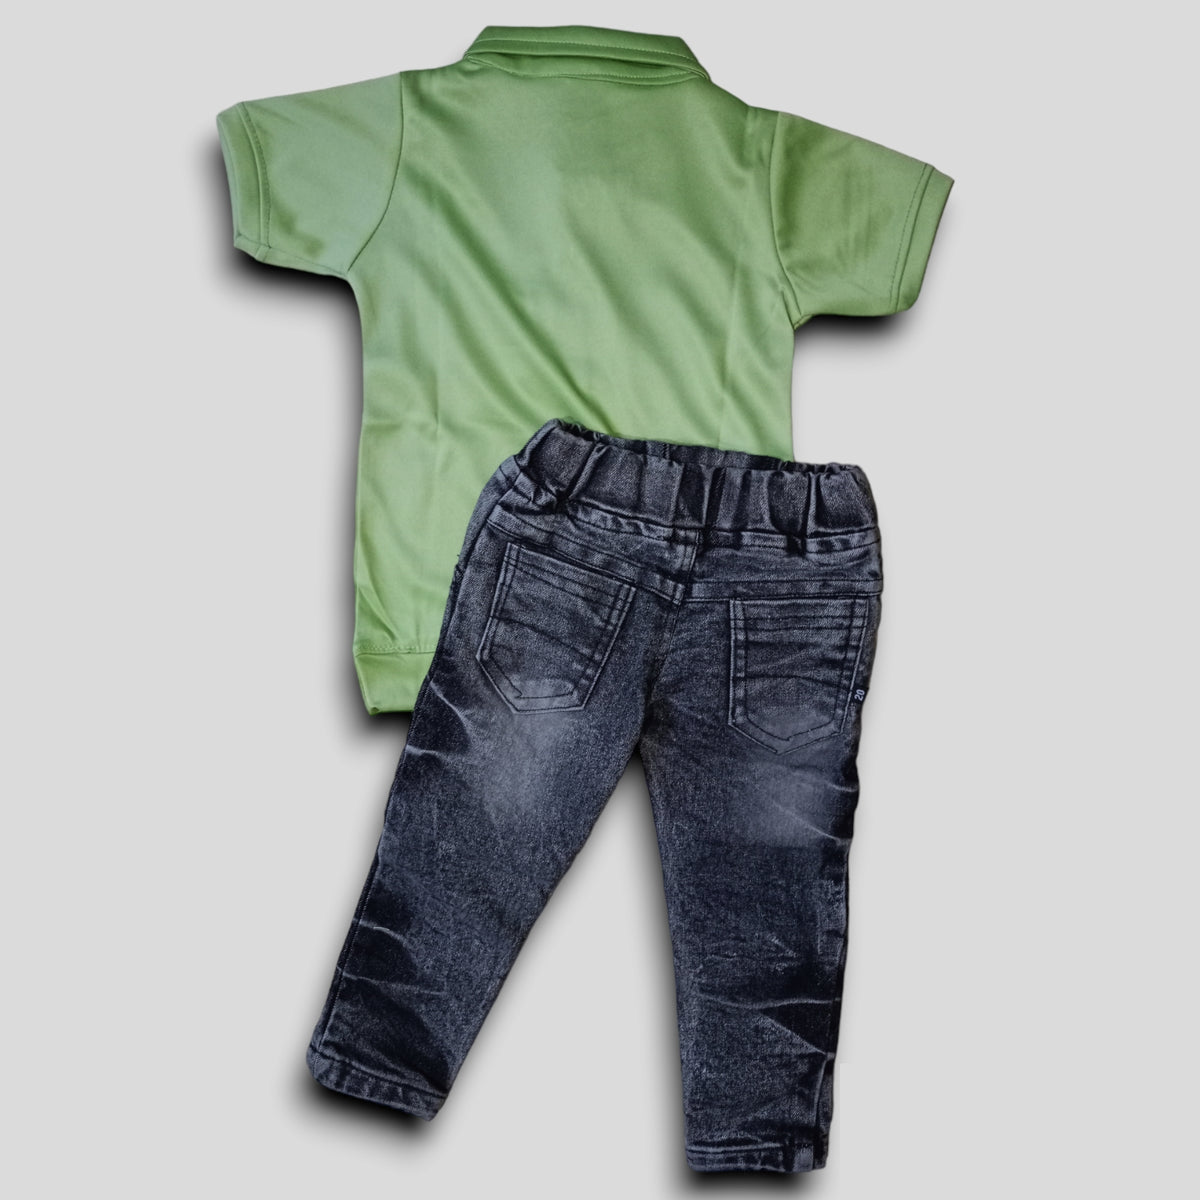 Olive Green Collored T-shirt & carbon Black Jeans